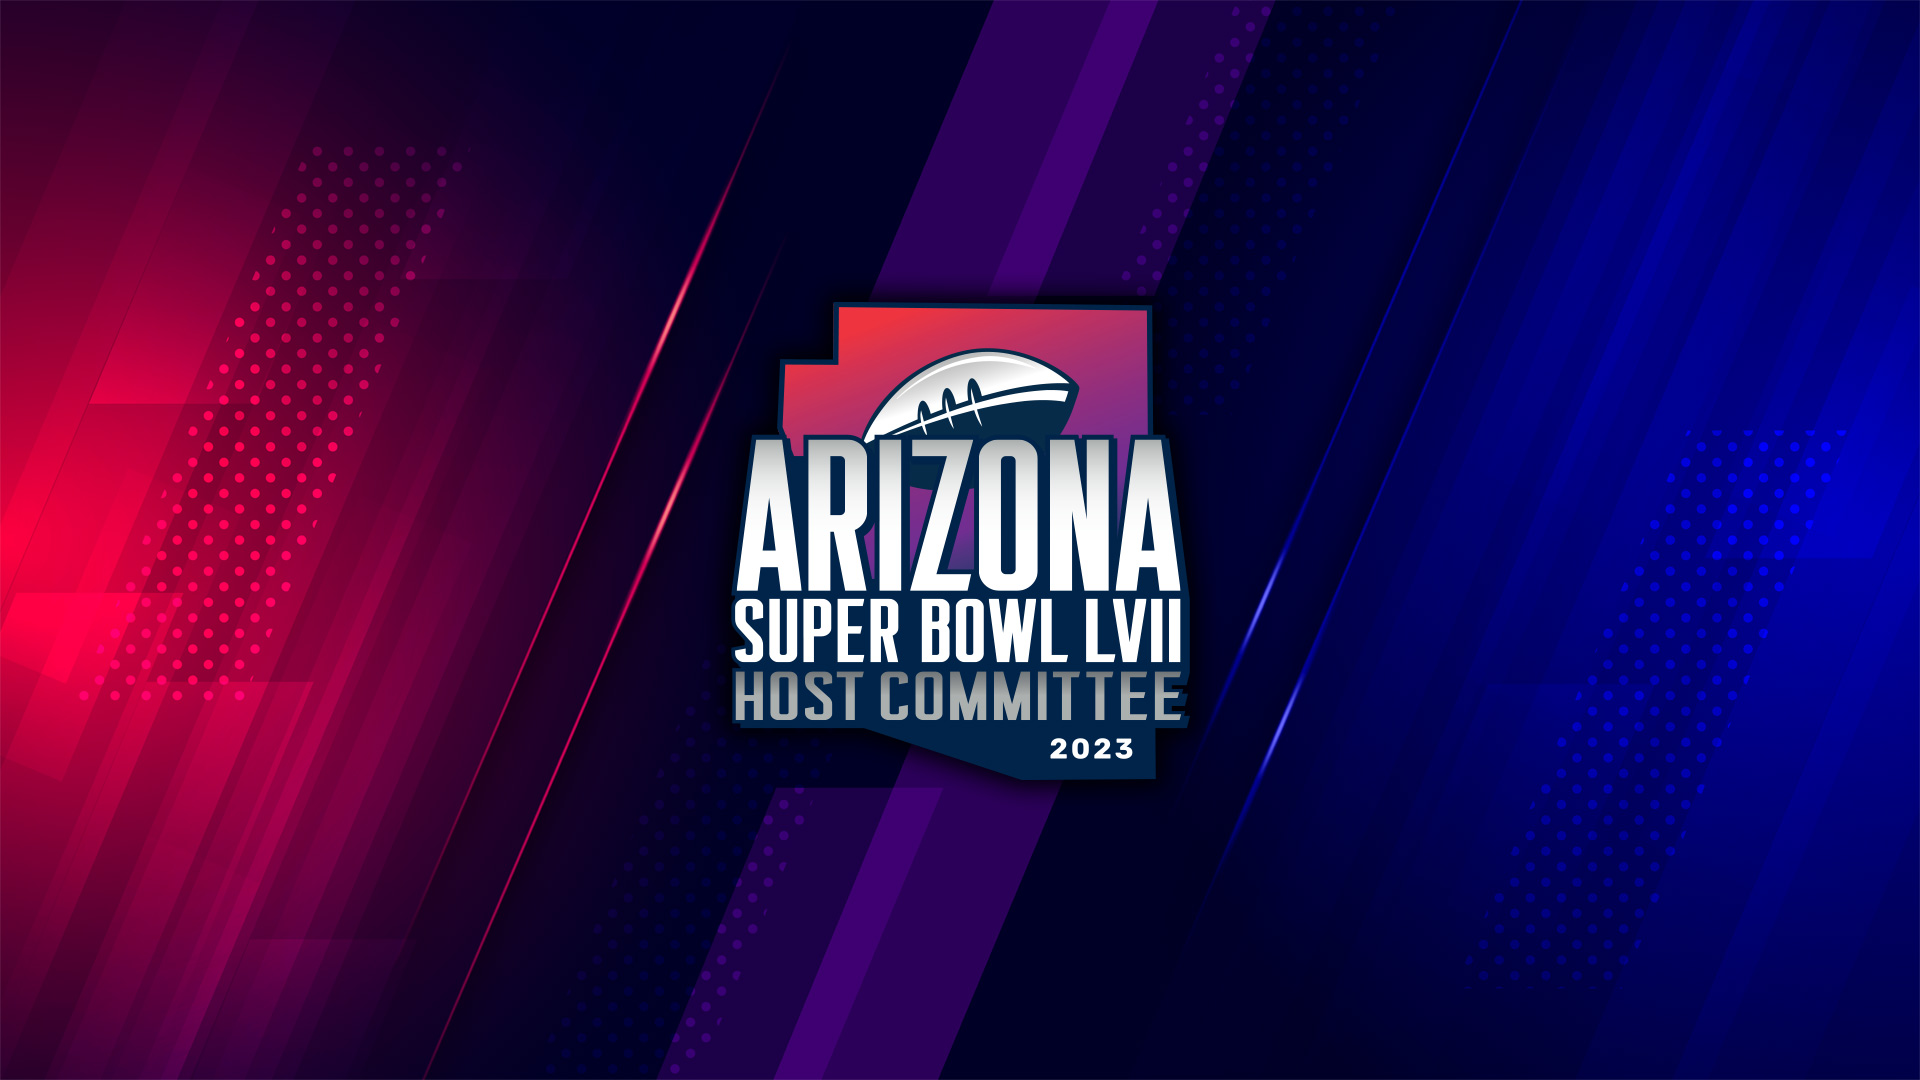 Stay Connected ARIZONA SUPER BOWL 2023 HOST COMMITTEE